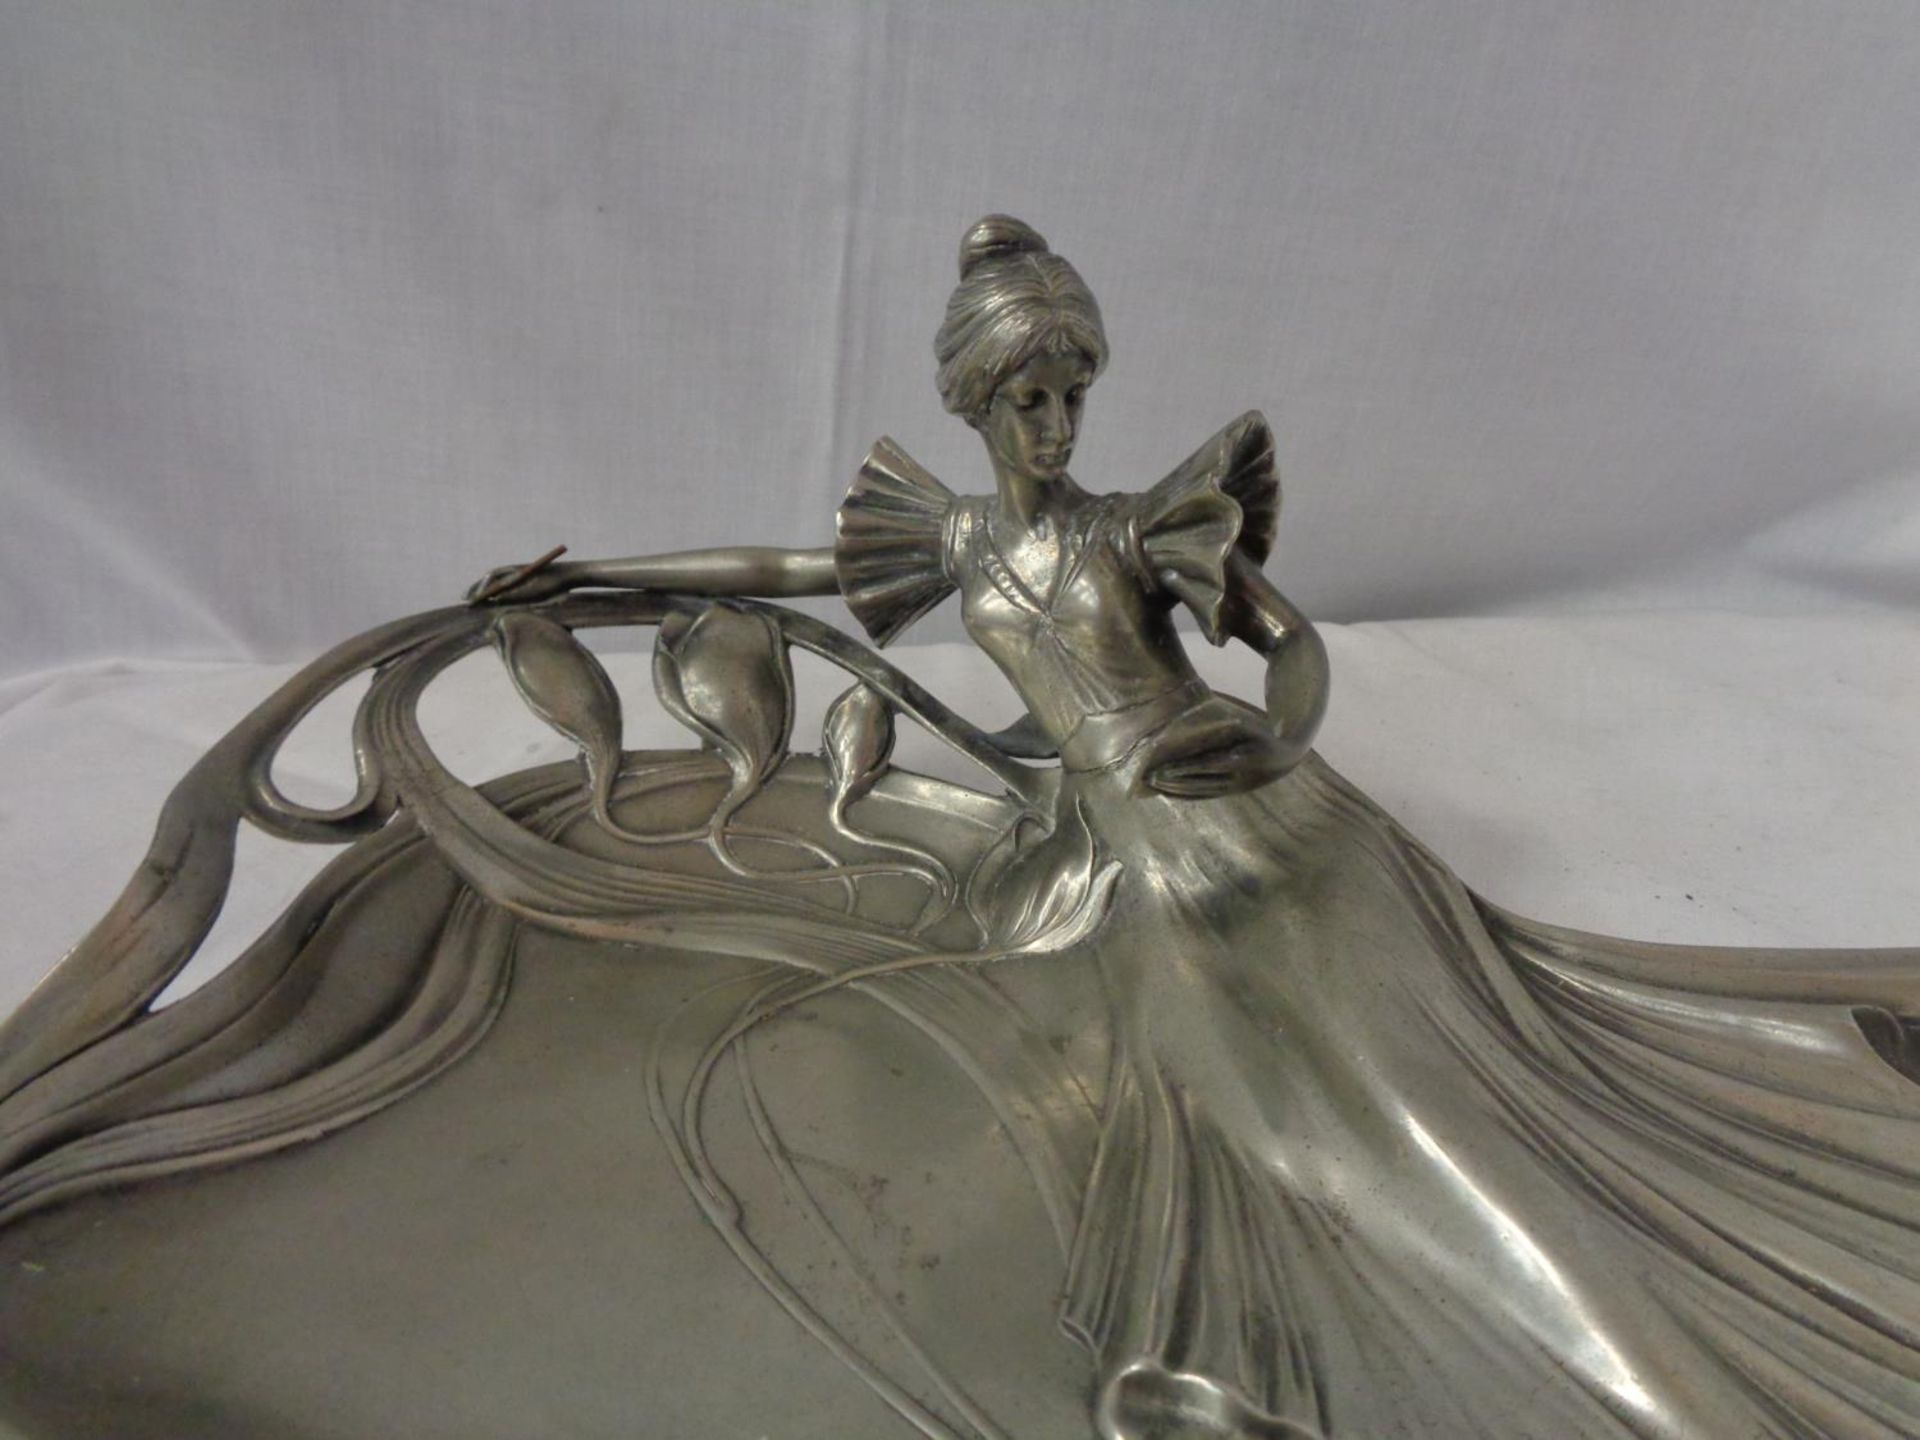 A PEWTER ART DECO STYLE DISH WITH THE FIGURE OF A LADY - Image 2 of 4